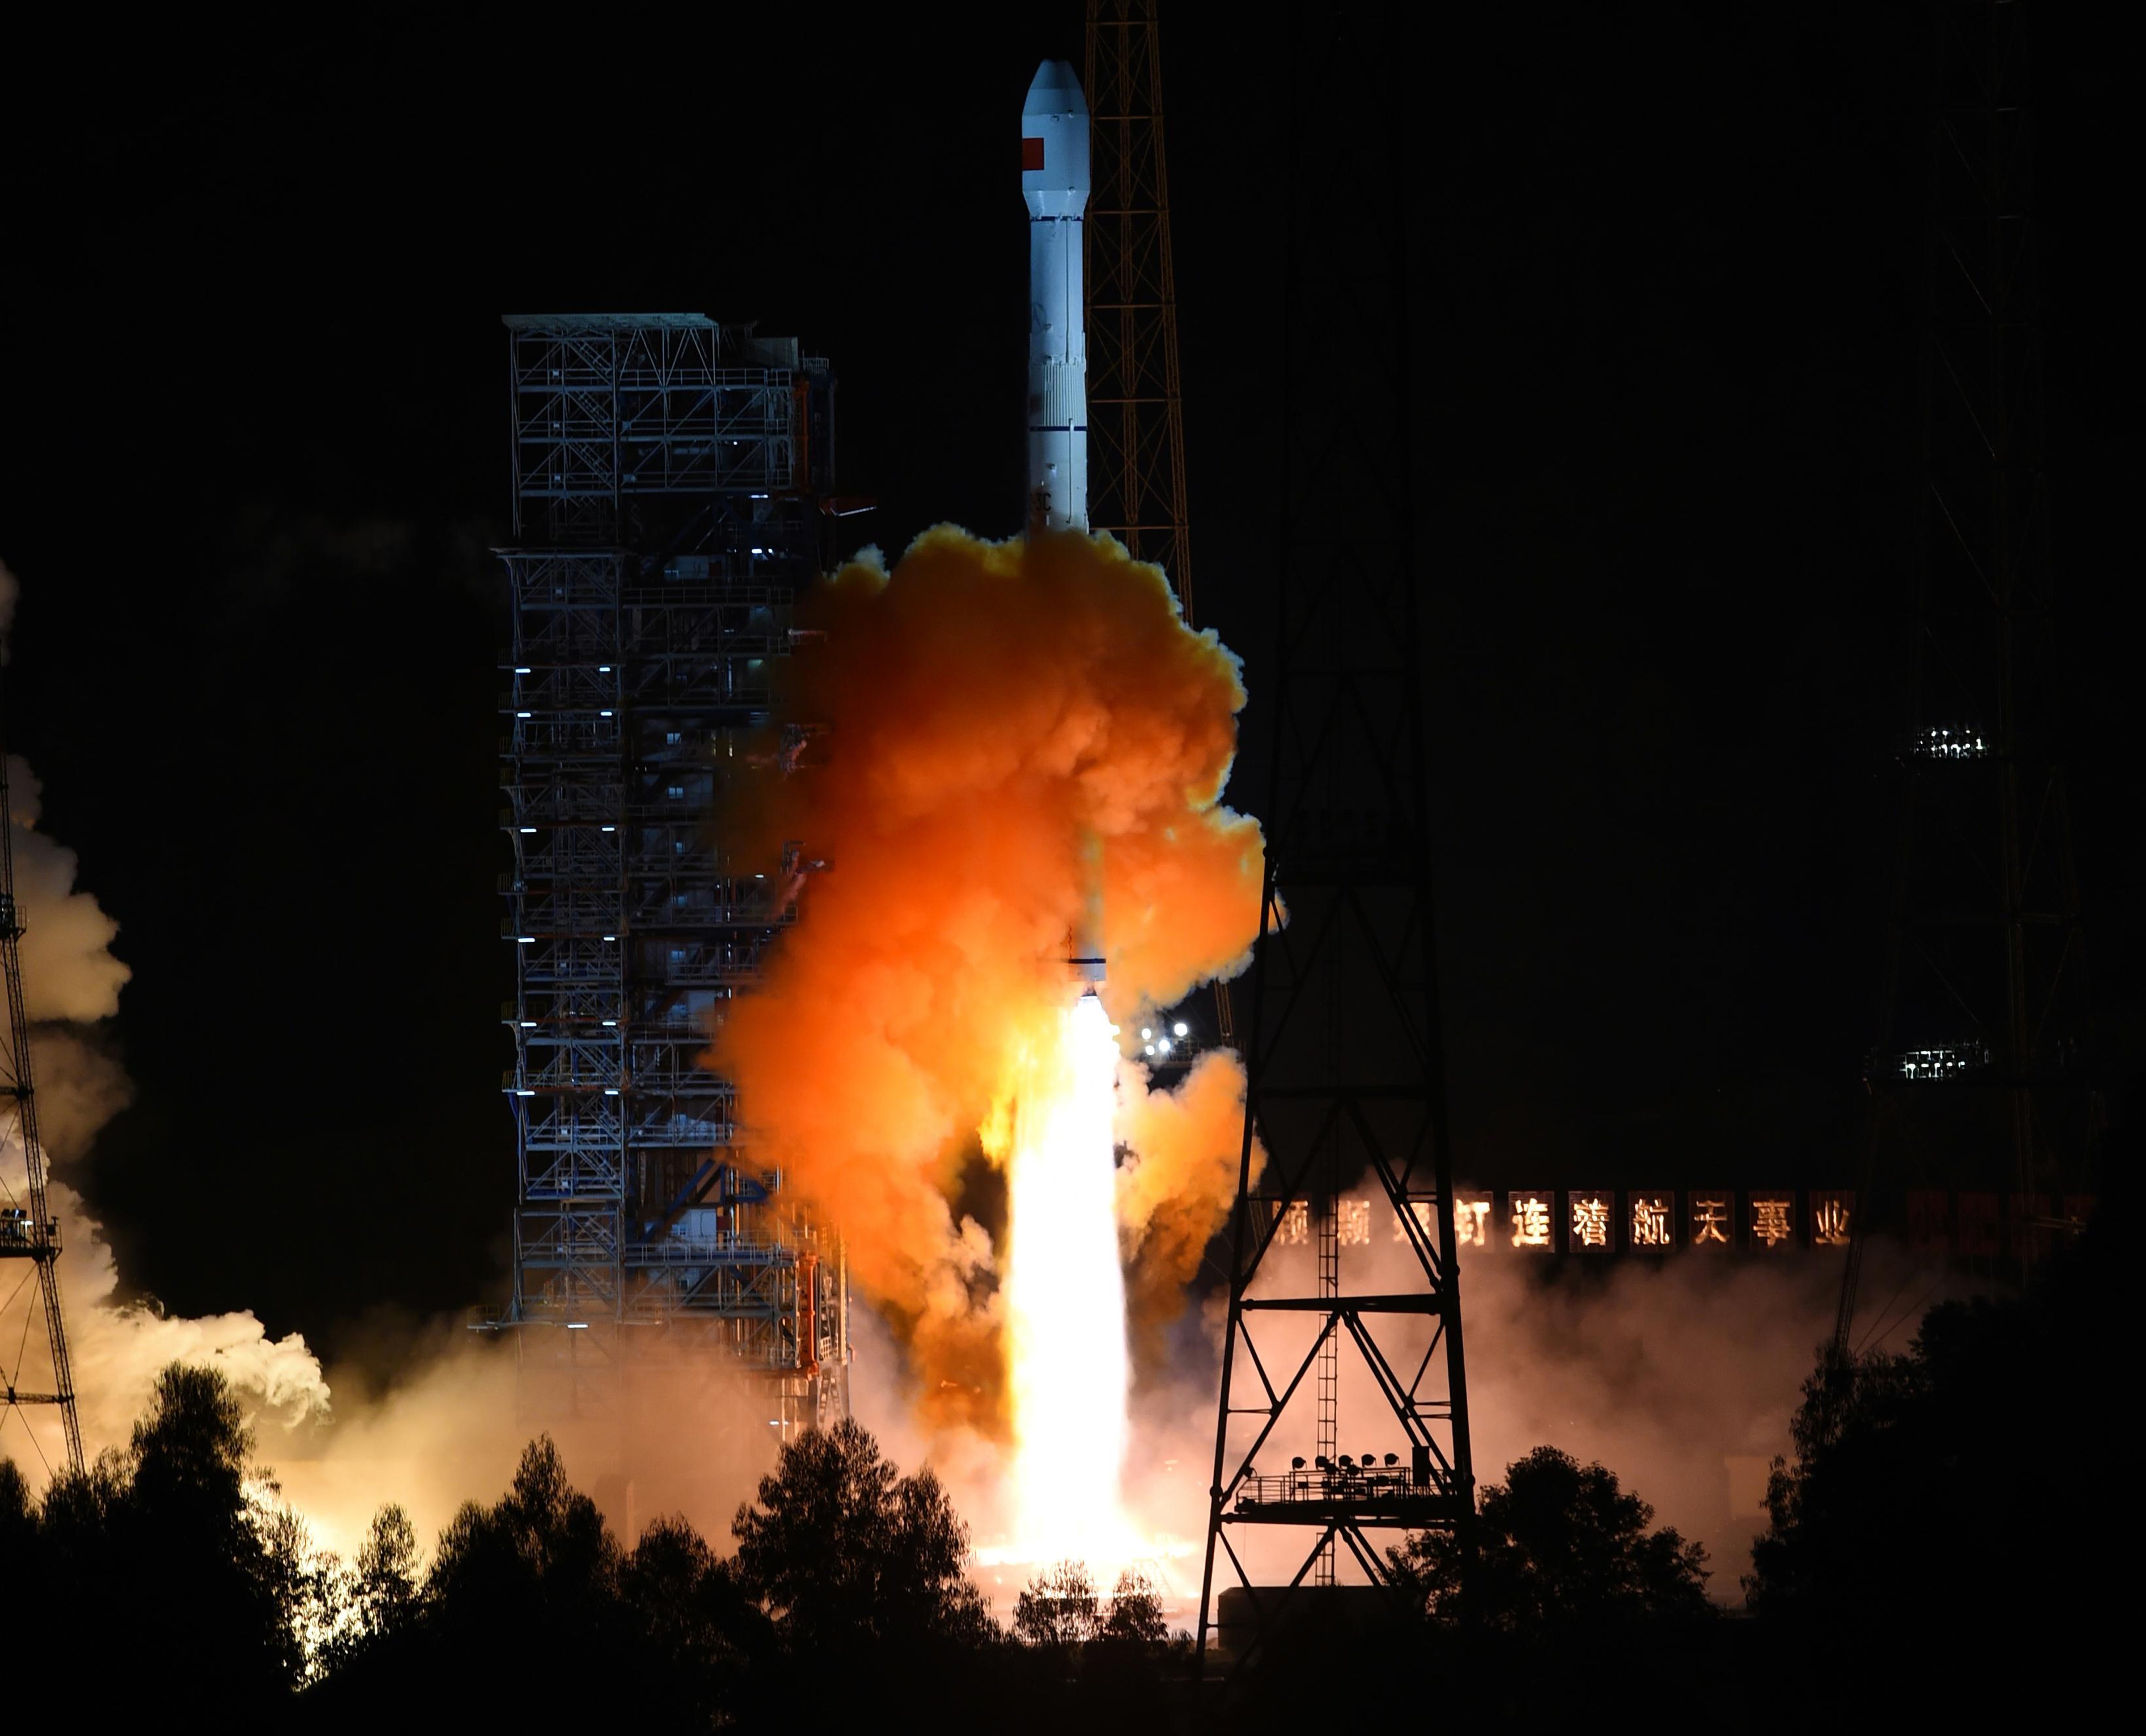 An unmanned spacecraft is launched from the Xichang Satellite Launch Center in southwest China's Sichuan Province on Oct. 24, 2014 (Jiang Hongjing—AP)